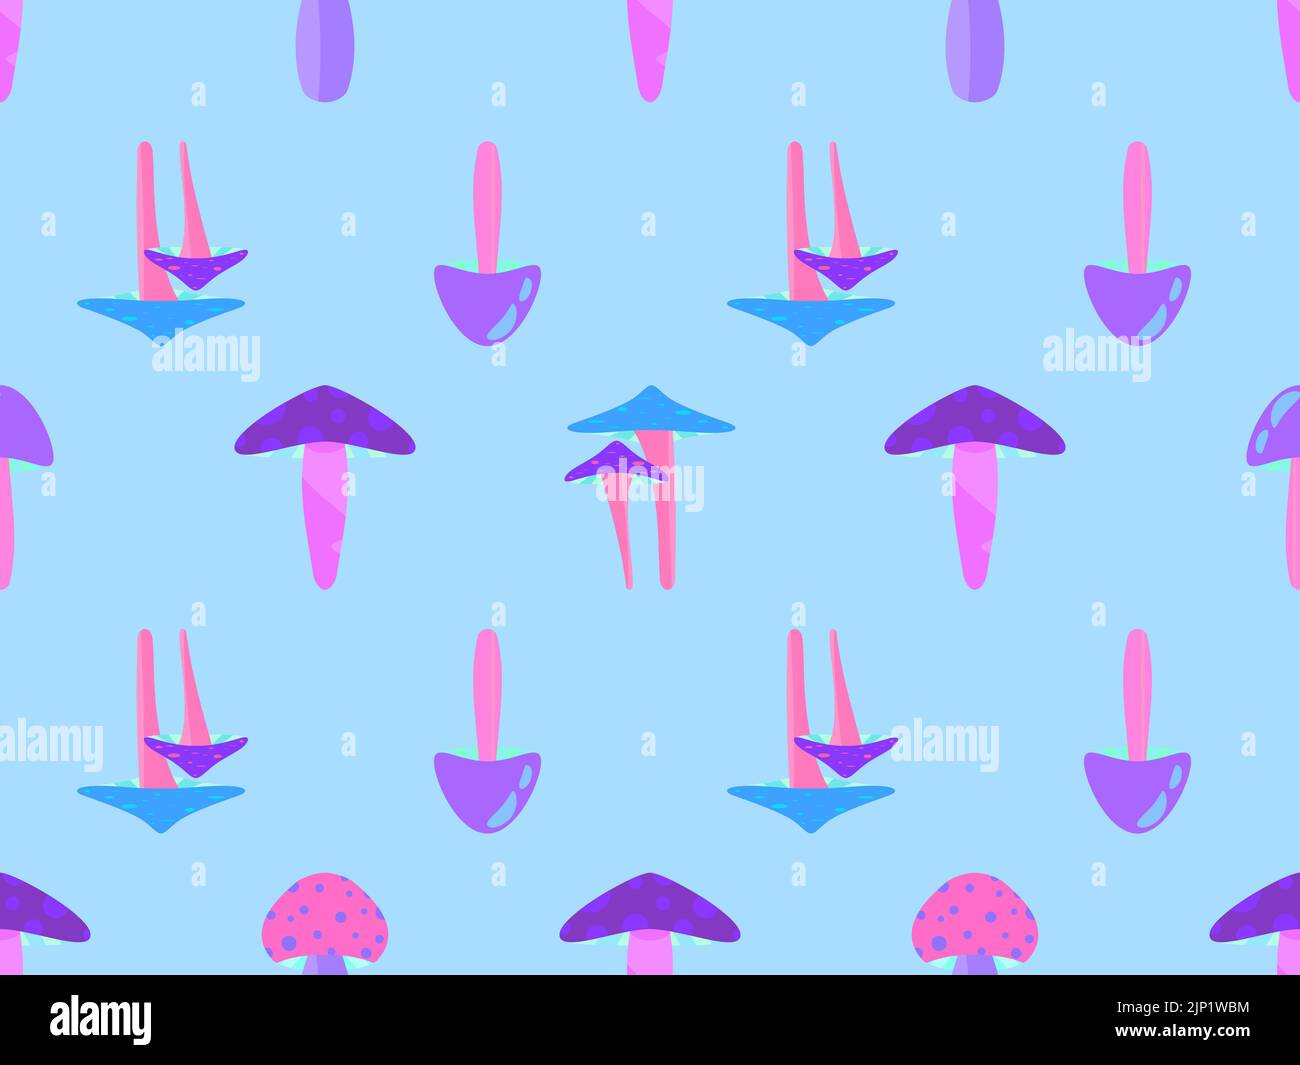 Seamless pattern with mushrooms. Various mushrooms. Wallpaper with purple and turquoise mushrooms. Design for banners and promotional items. Vector il Stock Vector